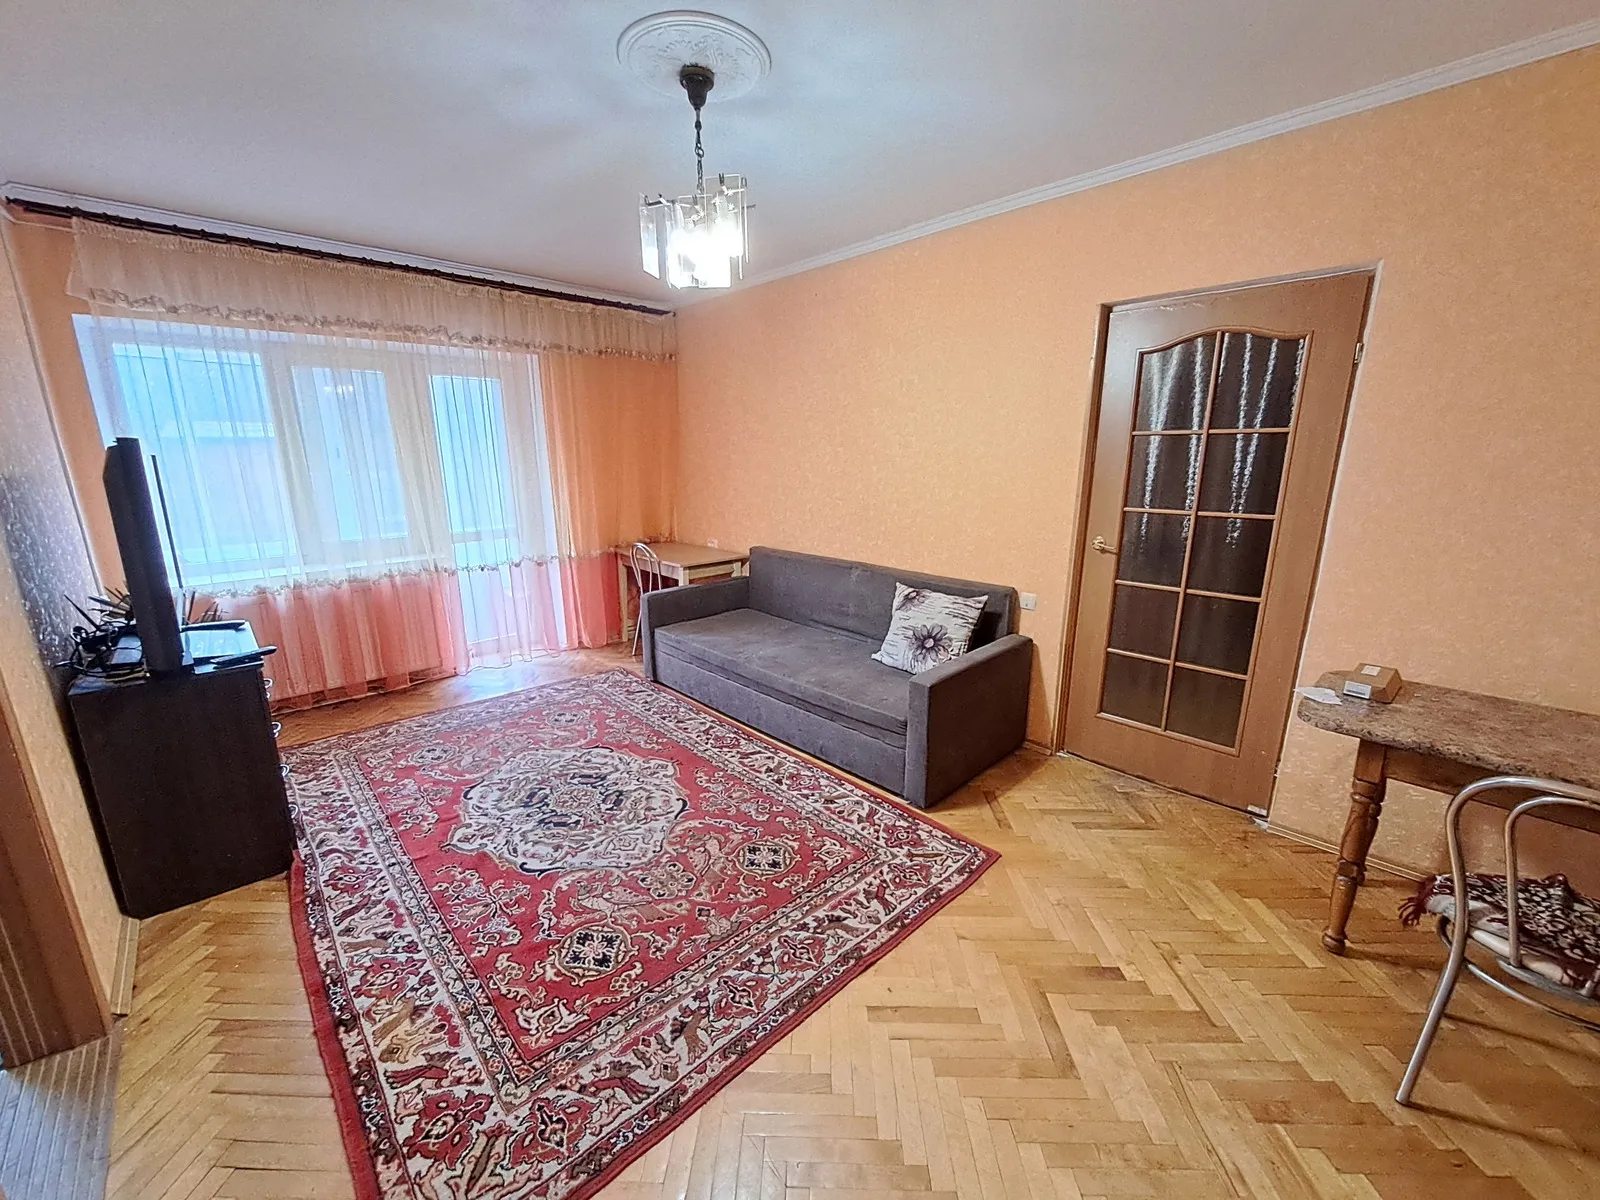 Apartments for sale. 2 rooms, 43 m², 3rd floor/3 floors. Staryy Podil vul., Ternopil. 